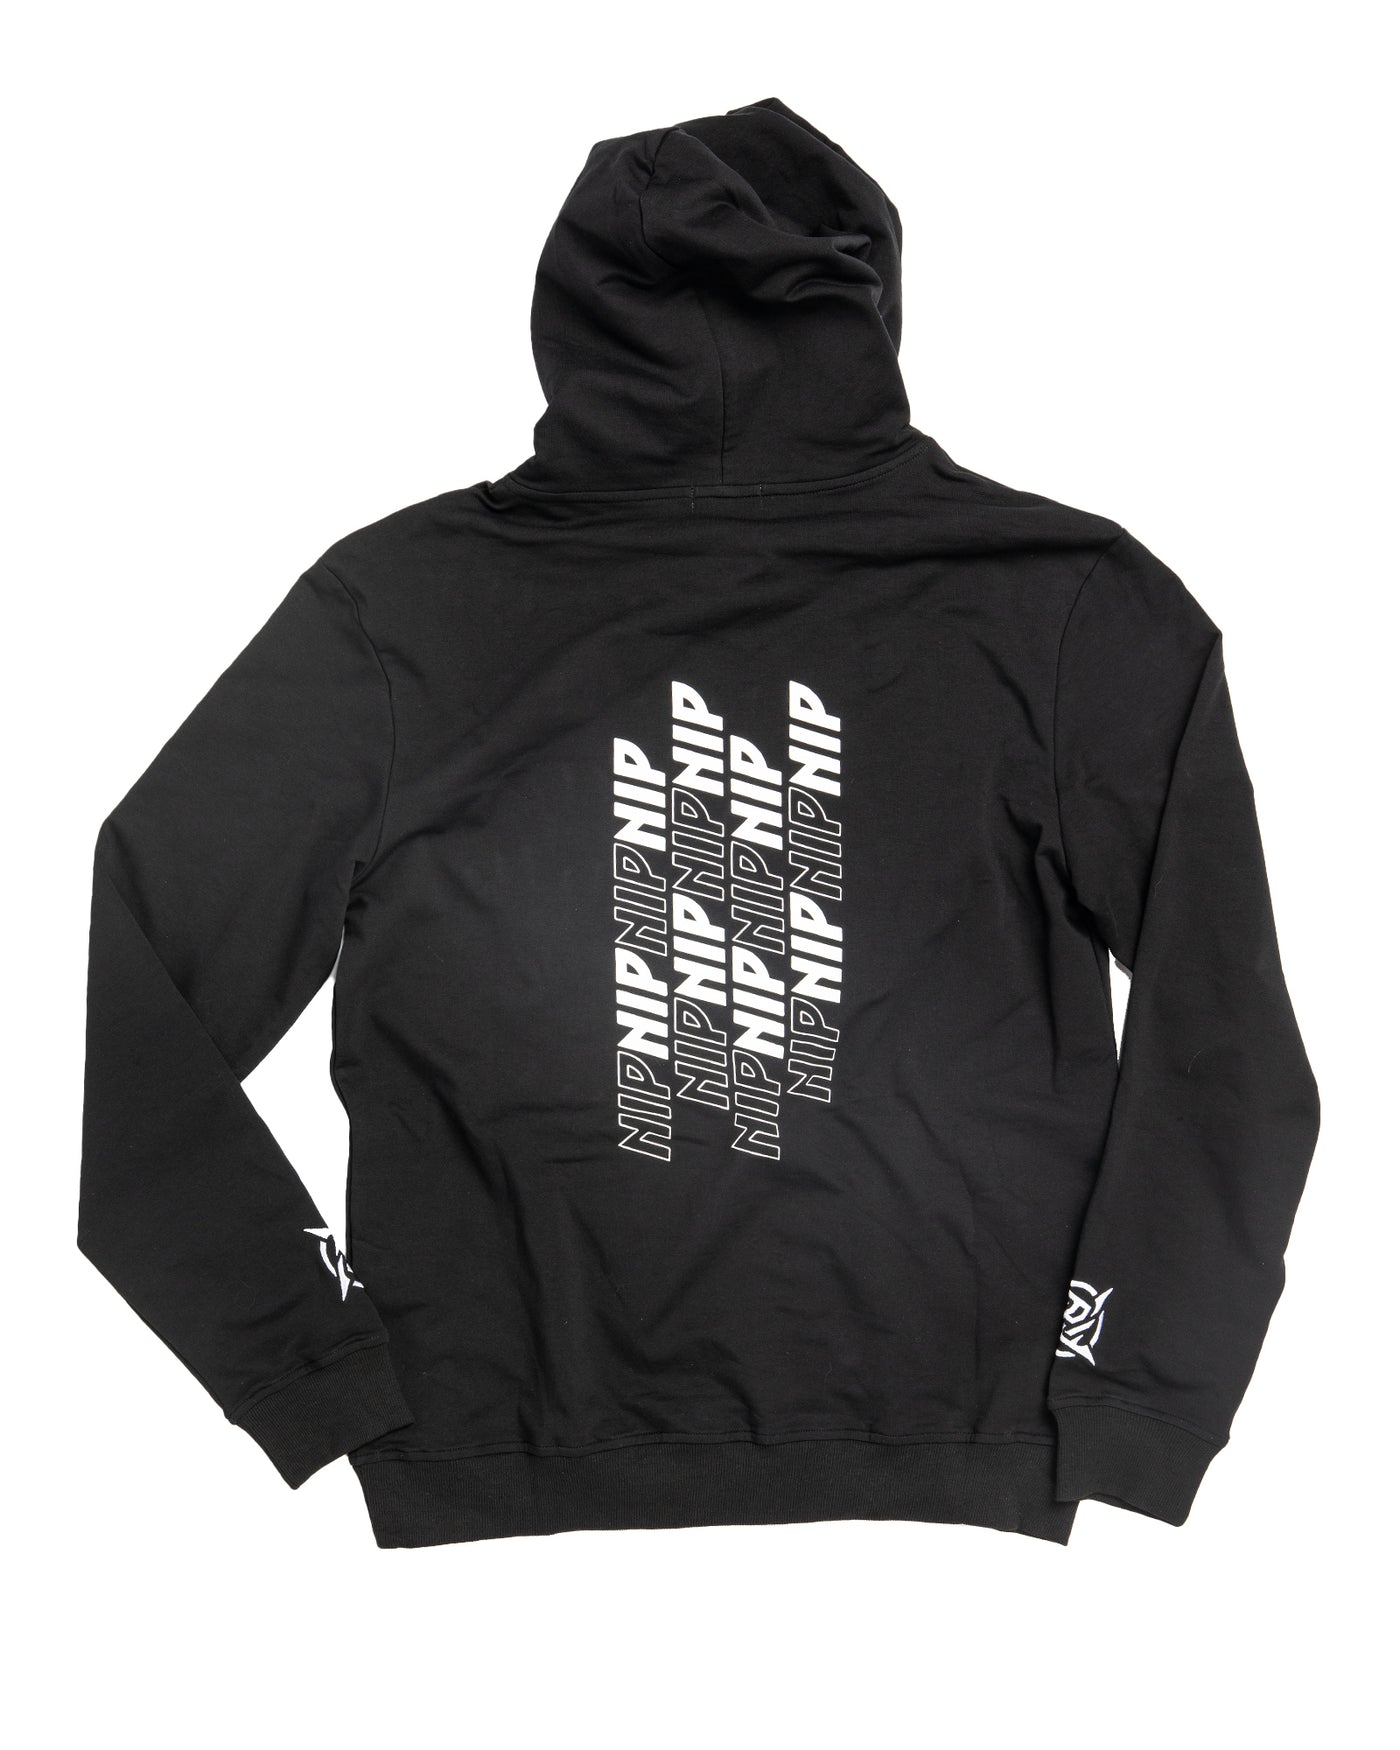 Ninjutsu Collection - Black Hoodie from Ninjas in Pyjamas Shop. A black hoodie from the Ninjutsu Merch Collection, featuring the Ninjas in Pyjamas logo subtly printed on the front. This cozy and stylish hoodie is perfect for showcasing your support for NIP while staying warm and comfortable.